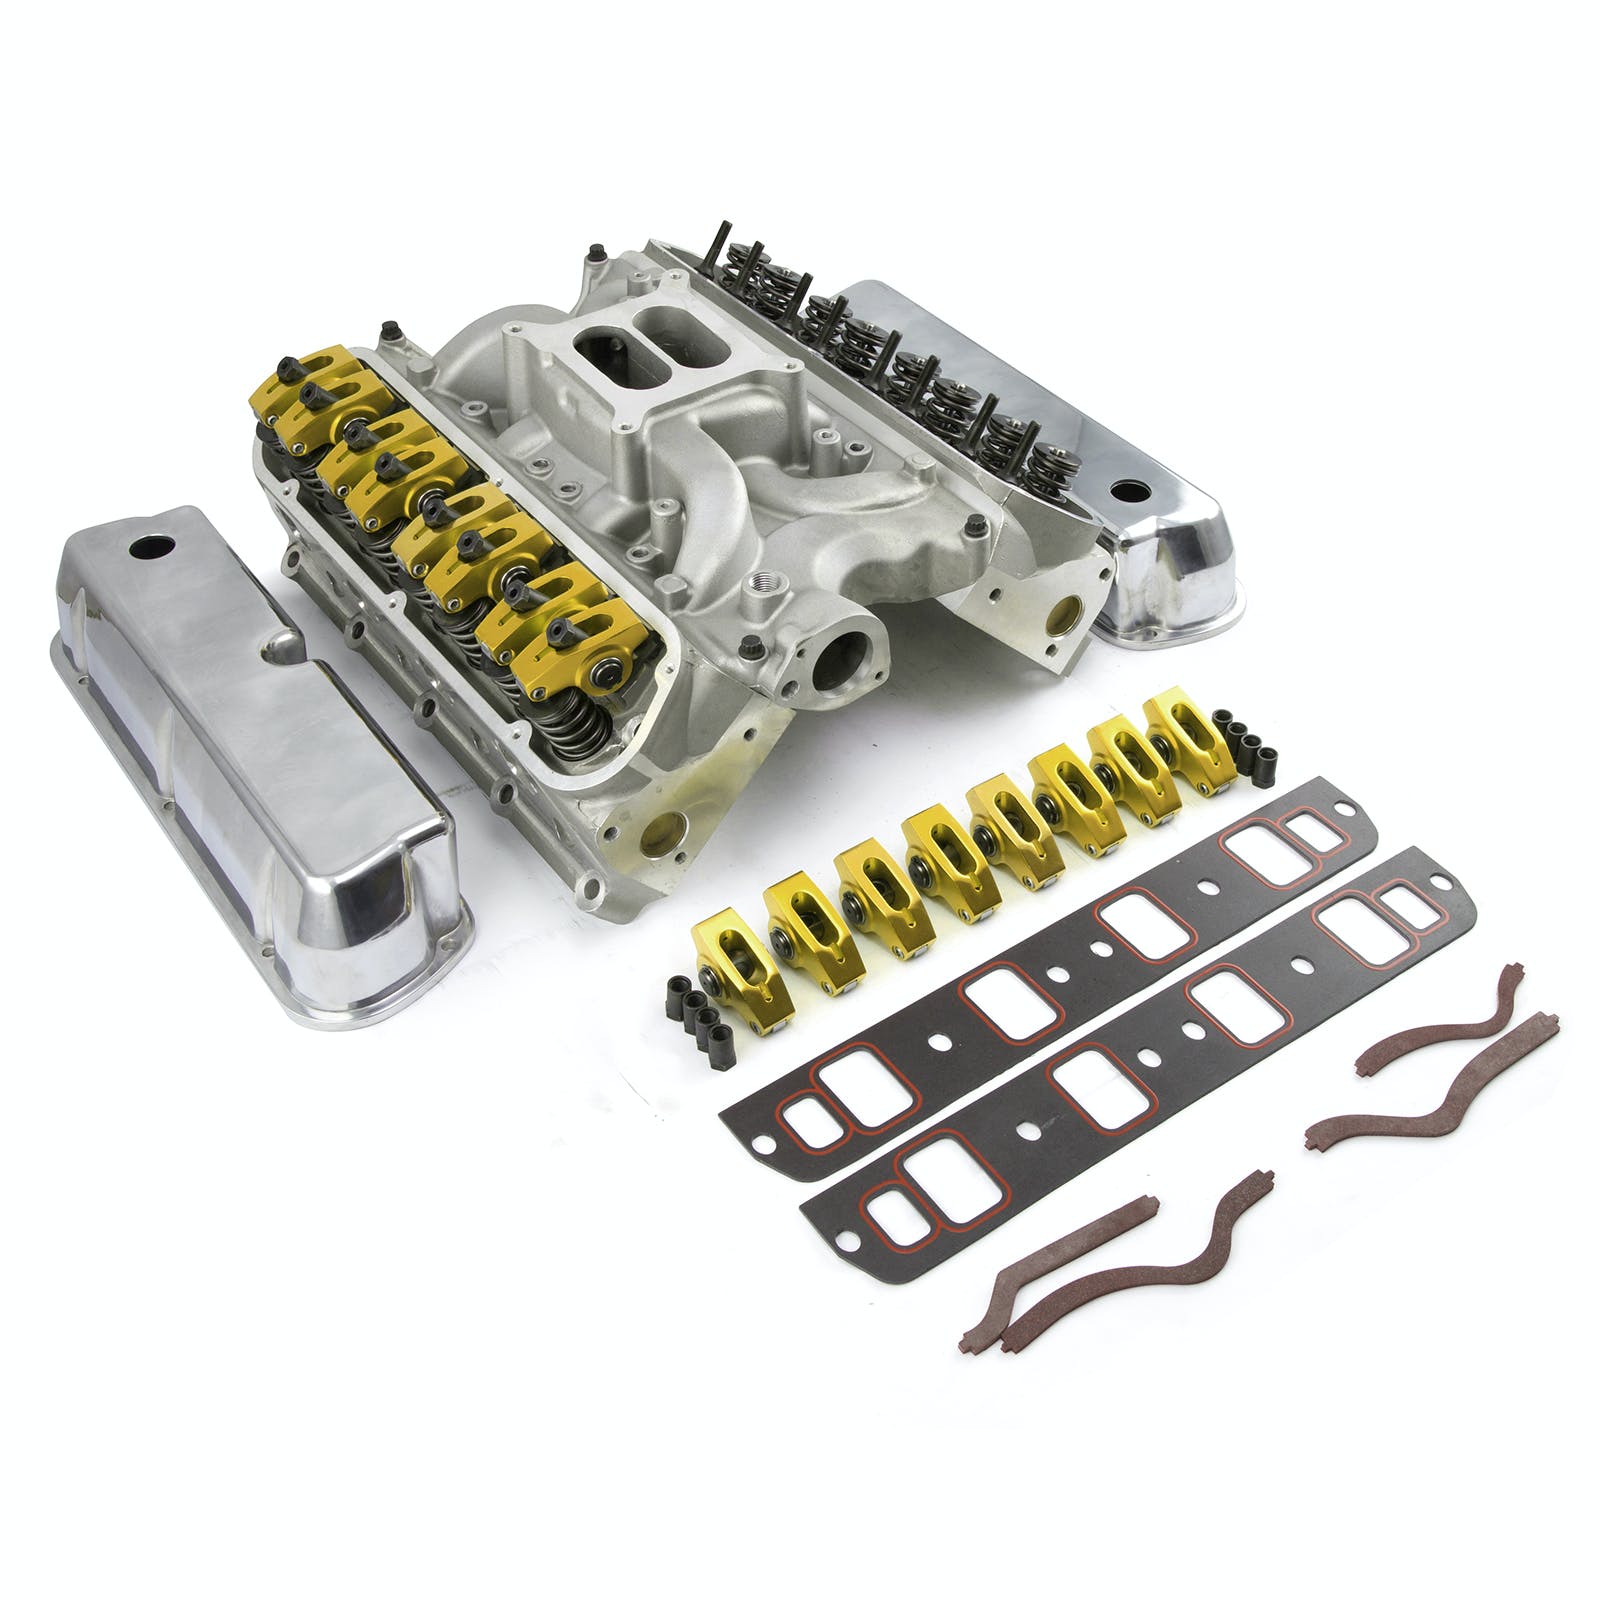 Speedmaster PCE435.1022 Hyd FT 190cc Cylinder Head Top End Engine Combo Kit